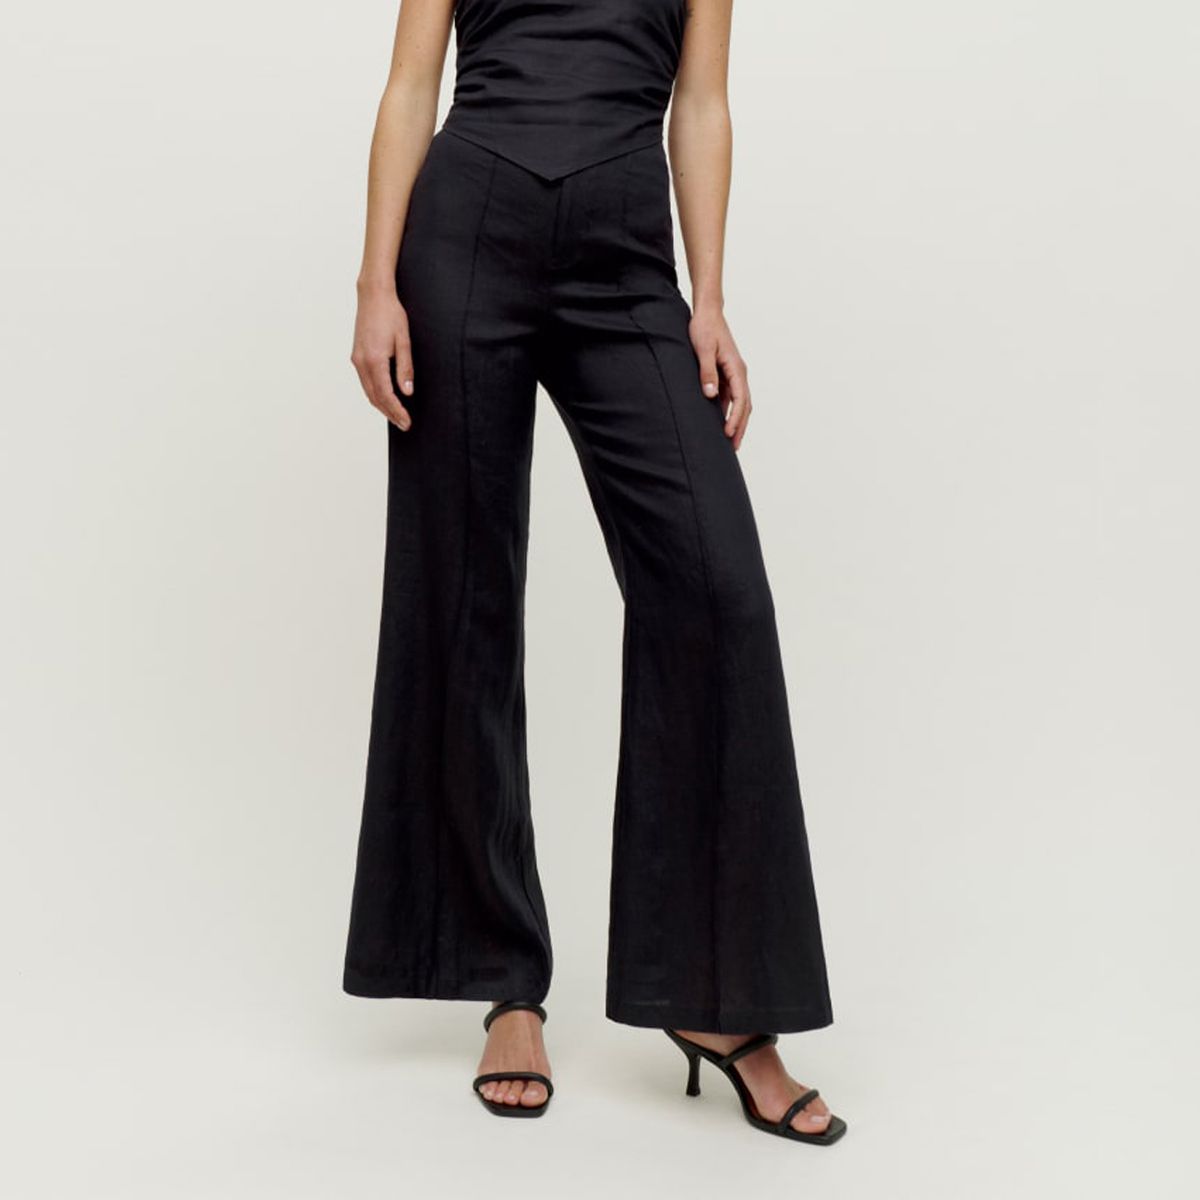 Black Work Pants That Will Elevate Your Wardrobe